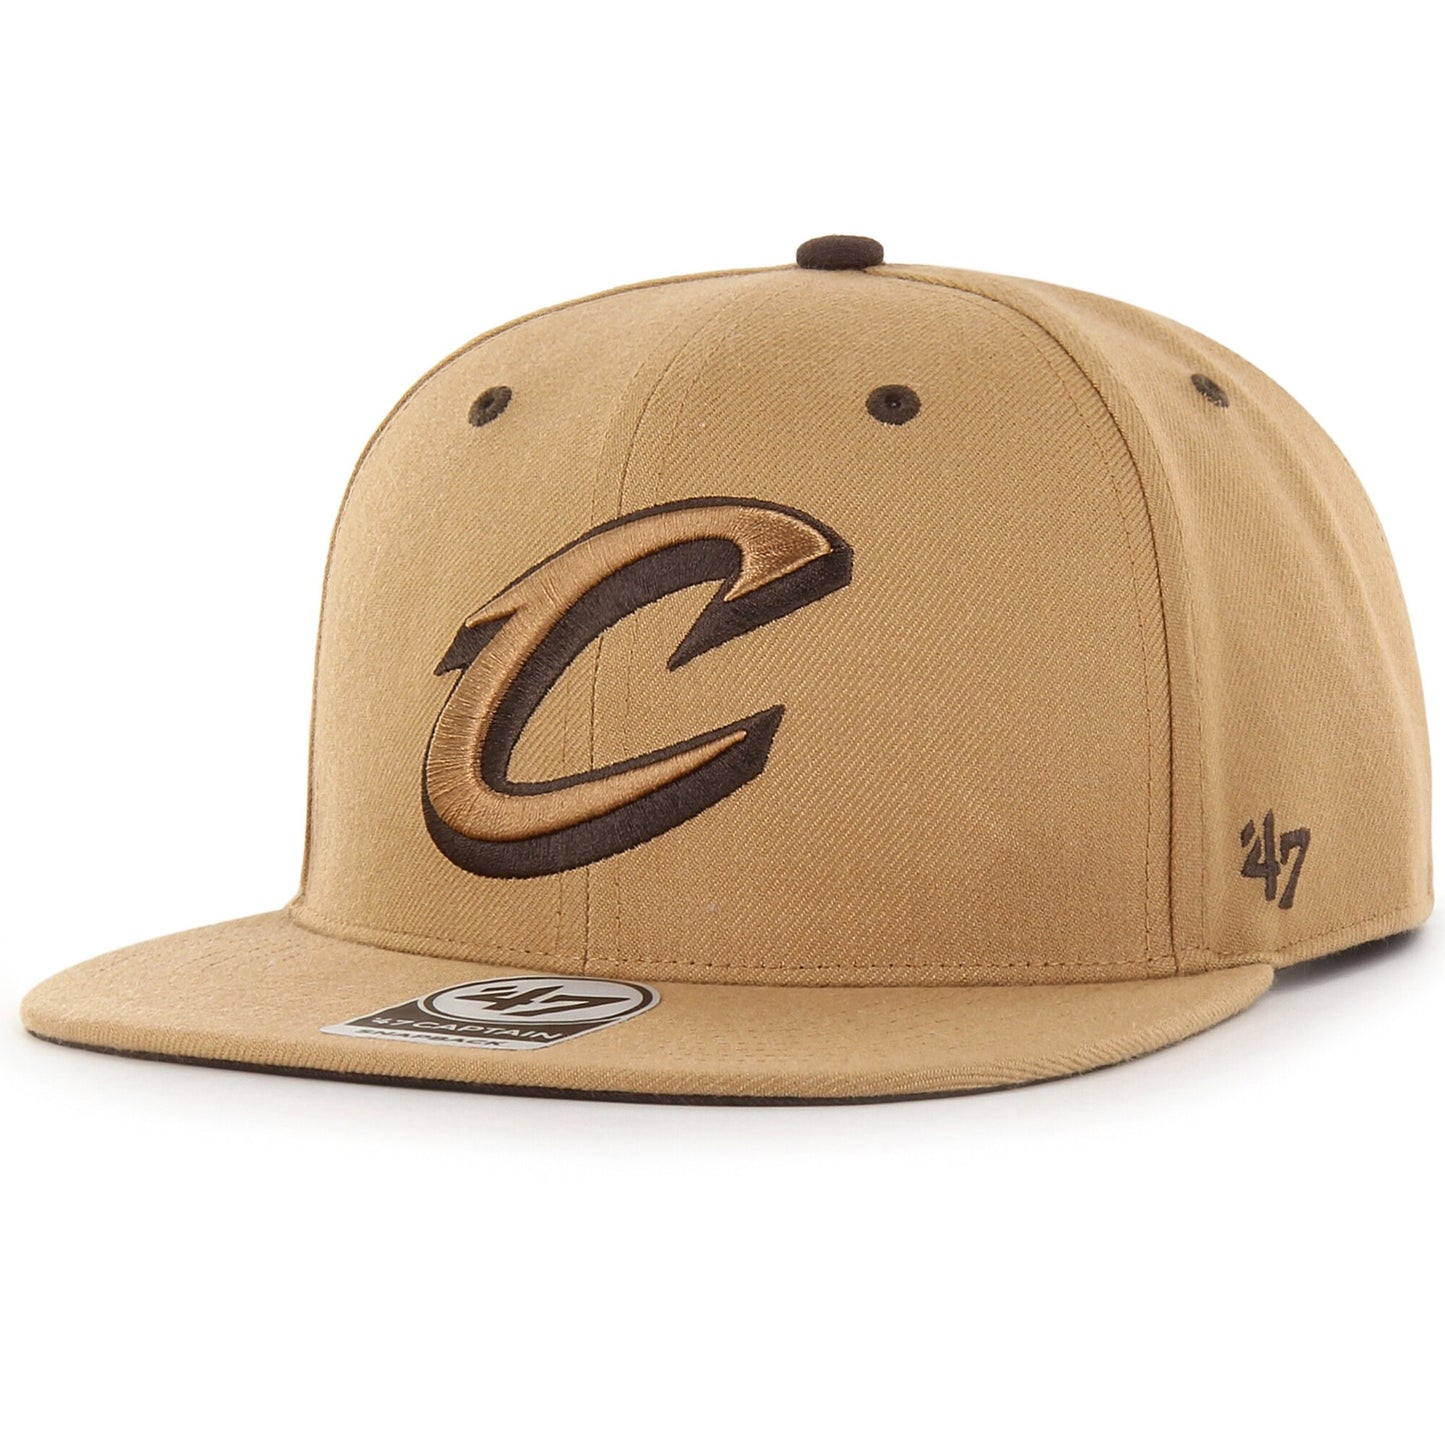 Cleveland Cavaliers '47 Toffee Captain Snapback Hat - Tan